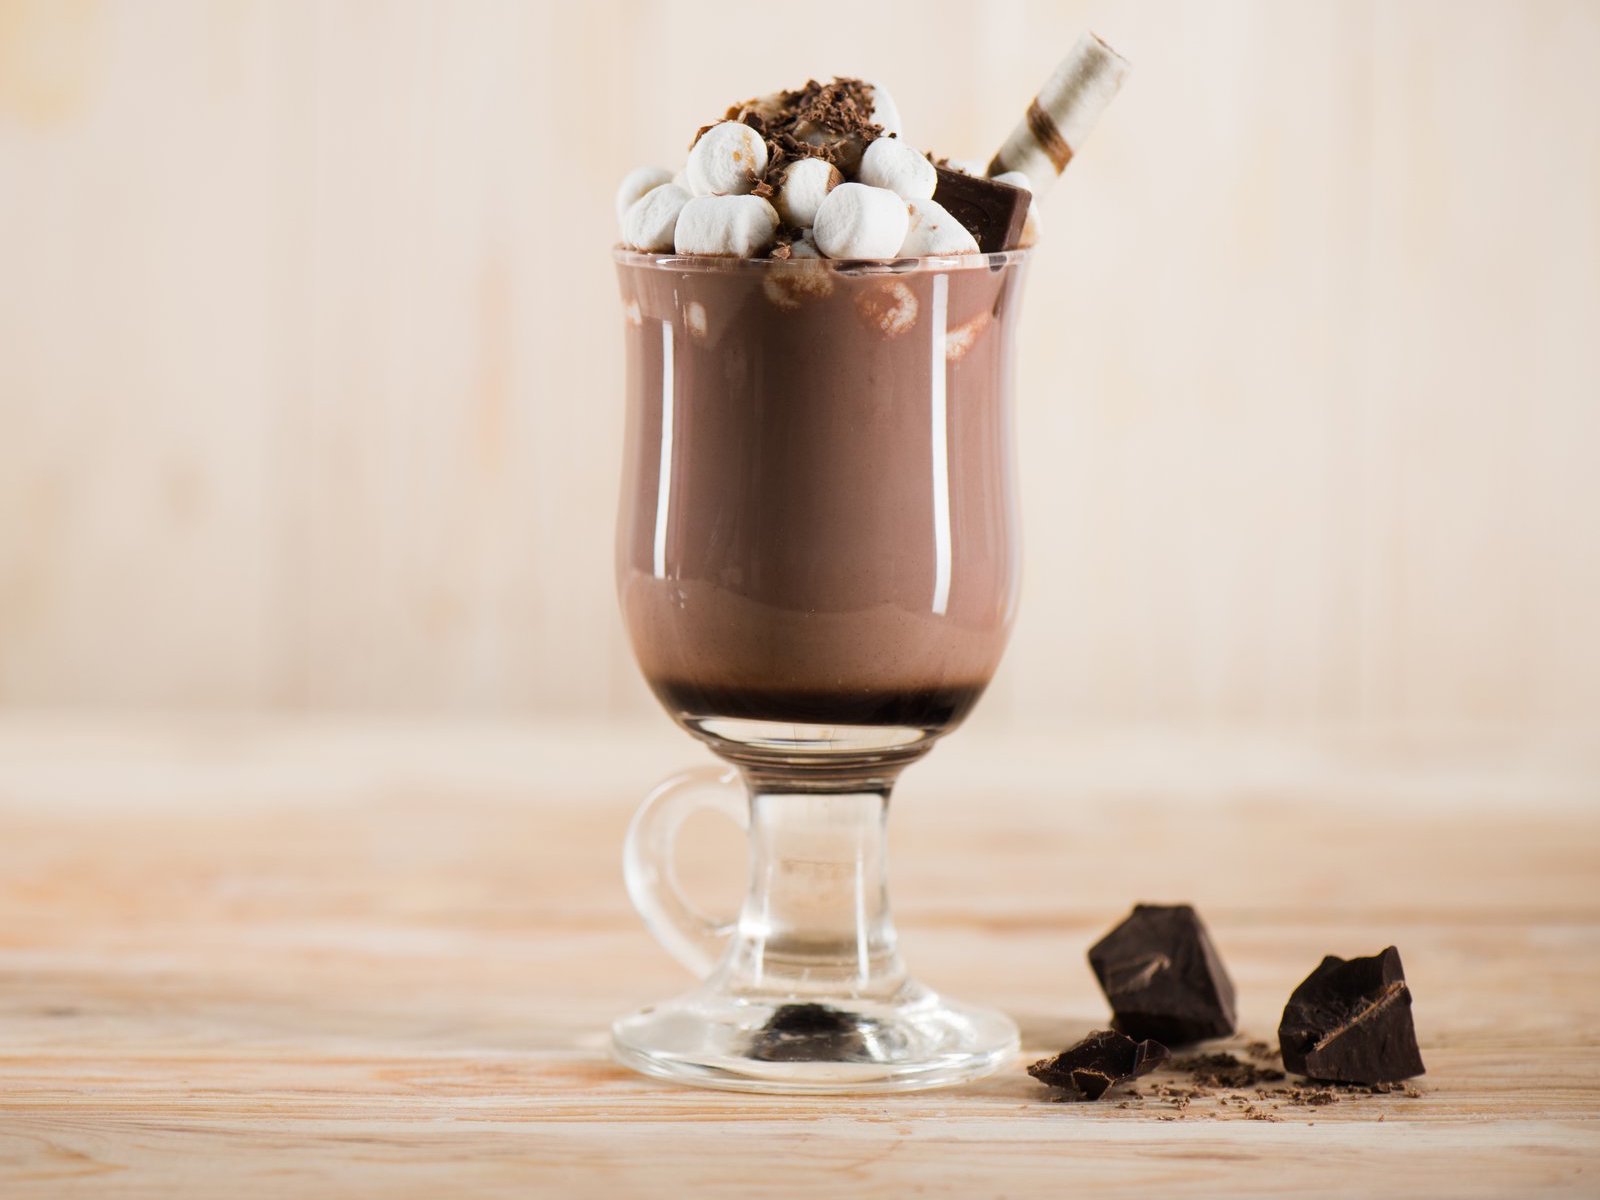 📷 Choose Between Normal or Pinterest Foods and We’ll Reveal If You Have a Male or Female Brain pinterest Chocolate milkshake